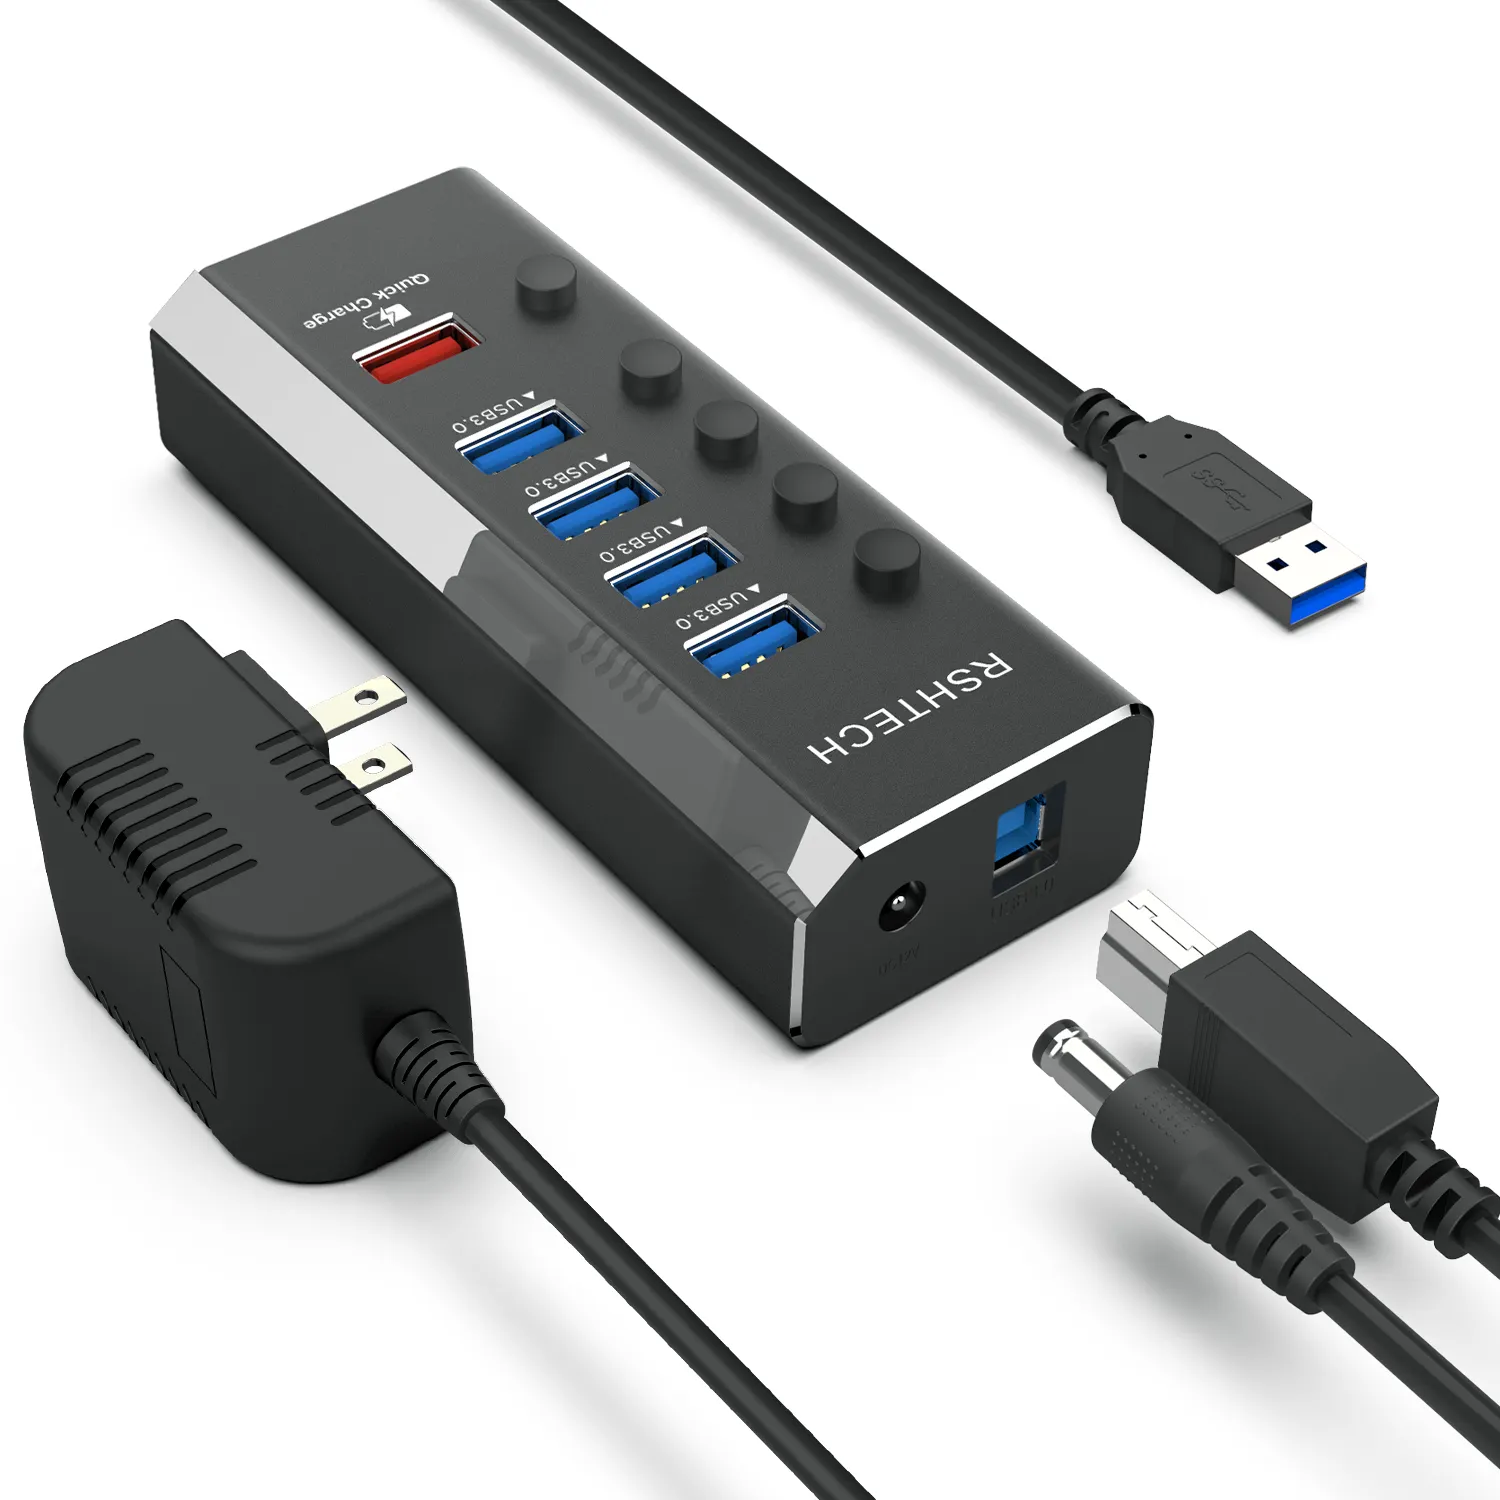 RSHTECH 5Gbps Hub USB With Fast Charging Port USB Hubs DC 12V/2A Power Adapter 5 Port USB 3.0 Hub For Laptop And PC